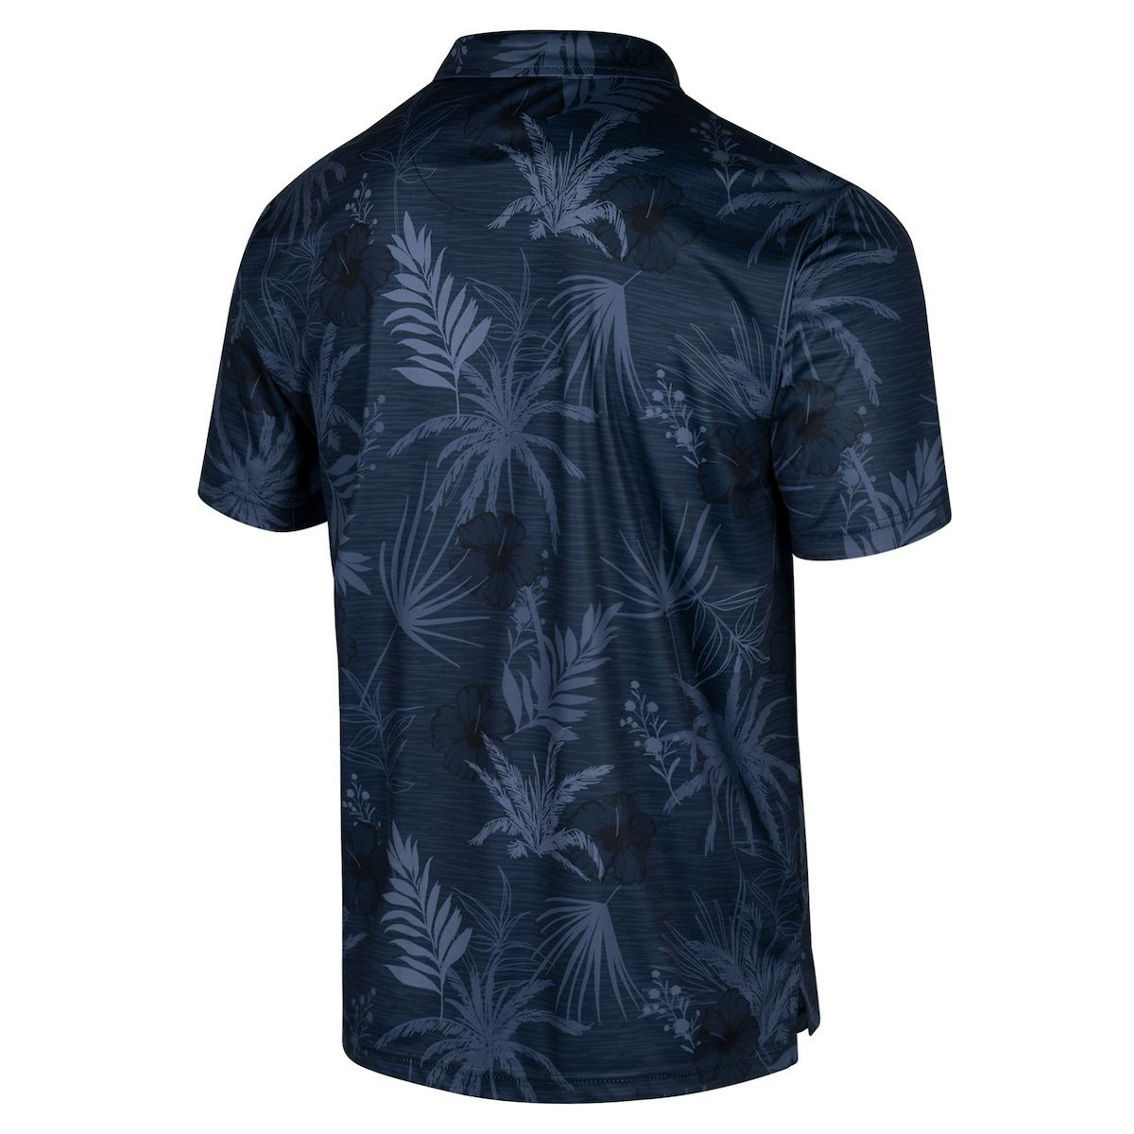 Colosseum Men's Navy Michigan Wolverines Palms Team Polo - Image 4 of 4